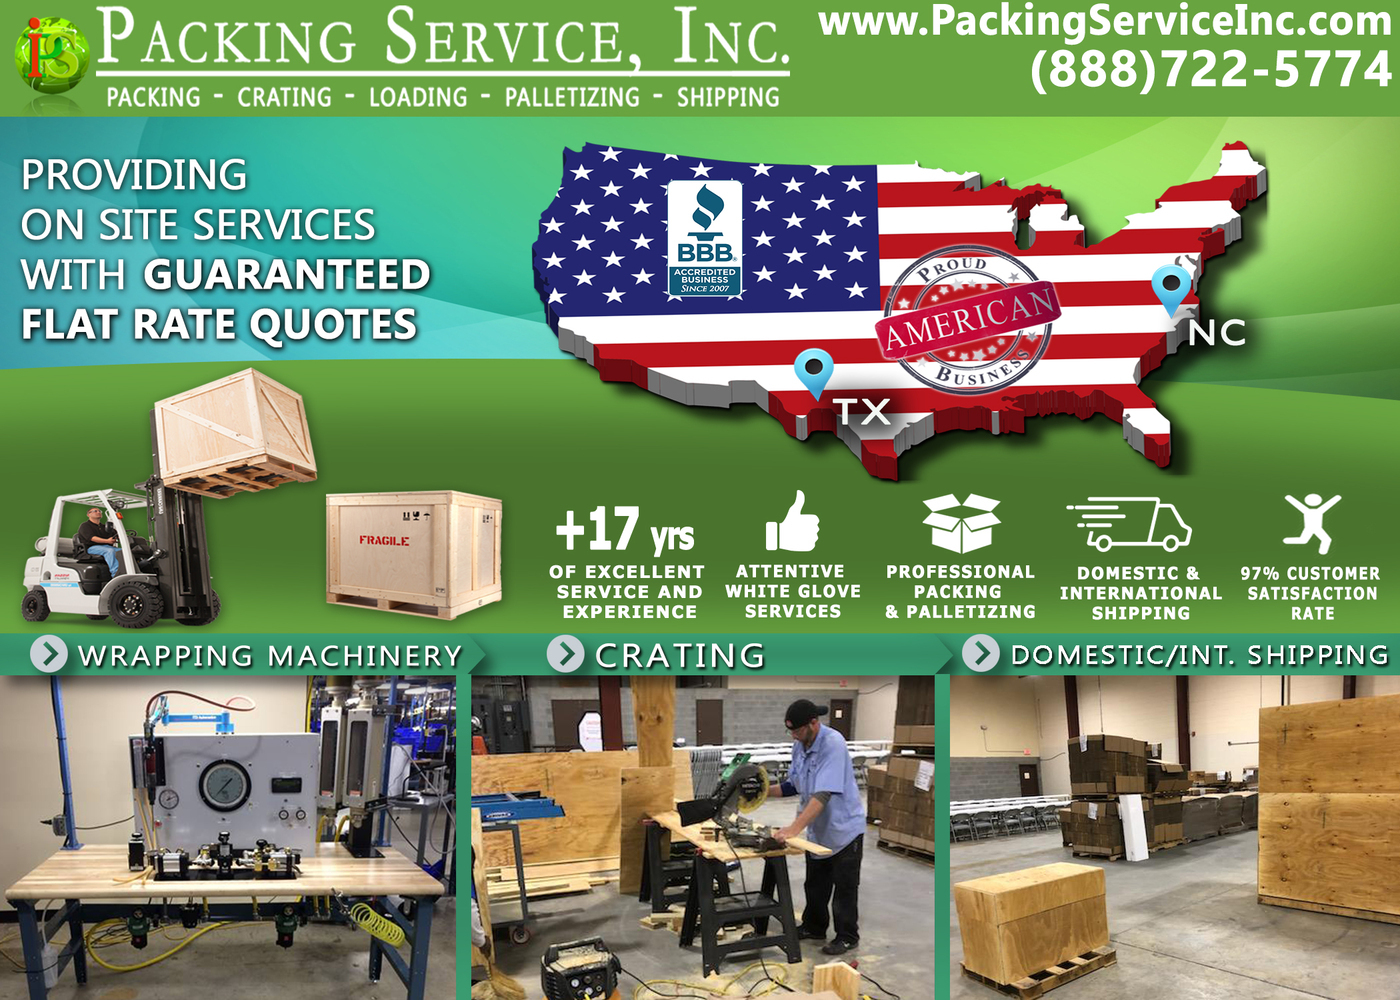 Packing Service Inc.